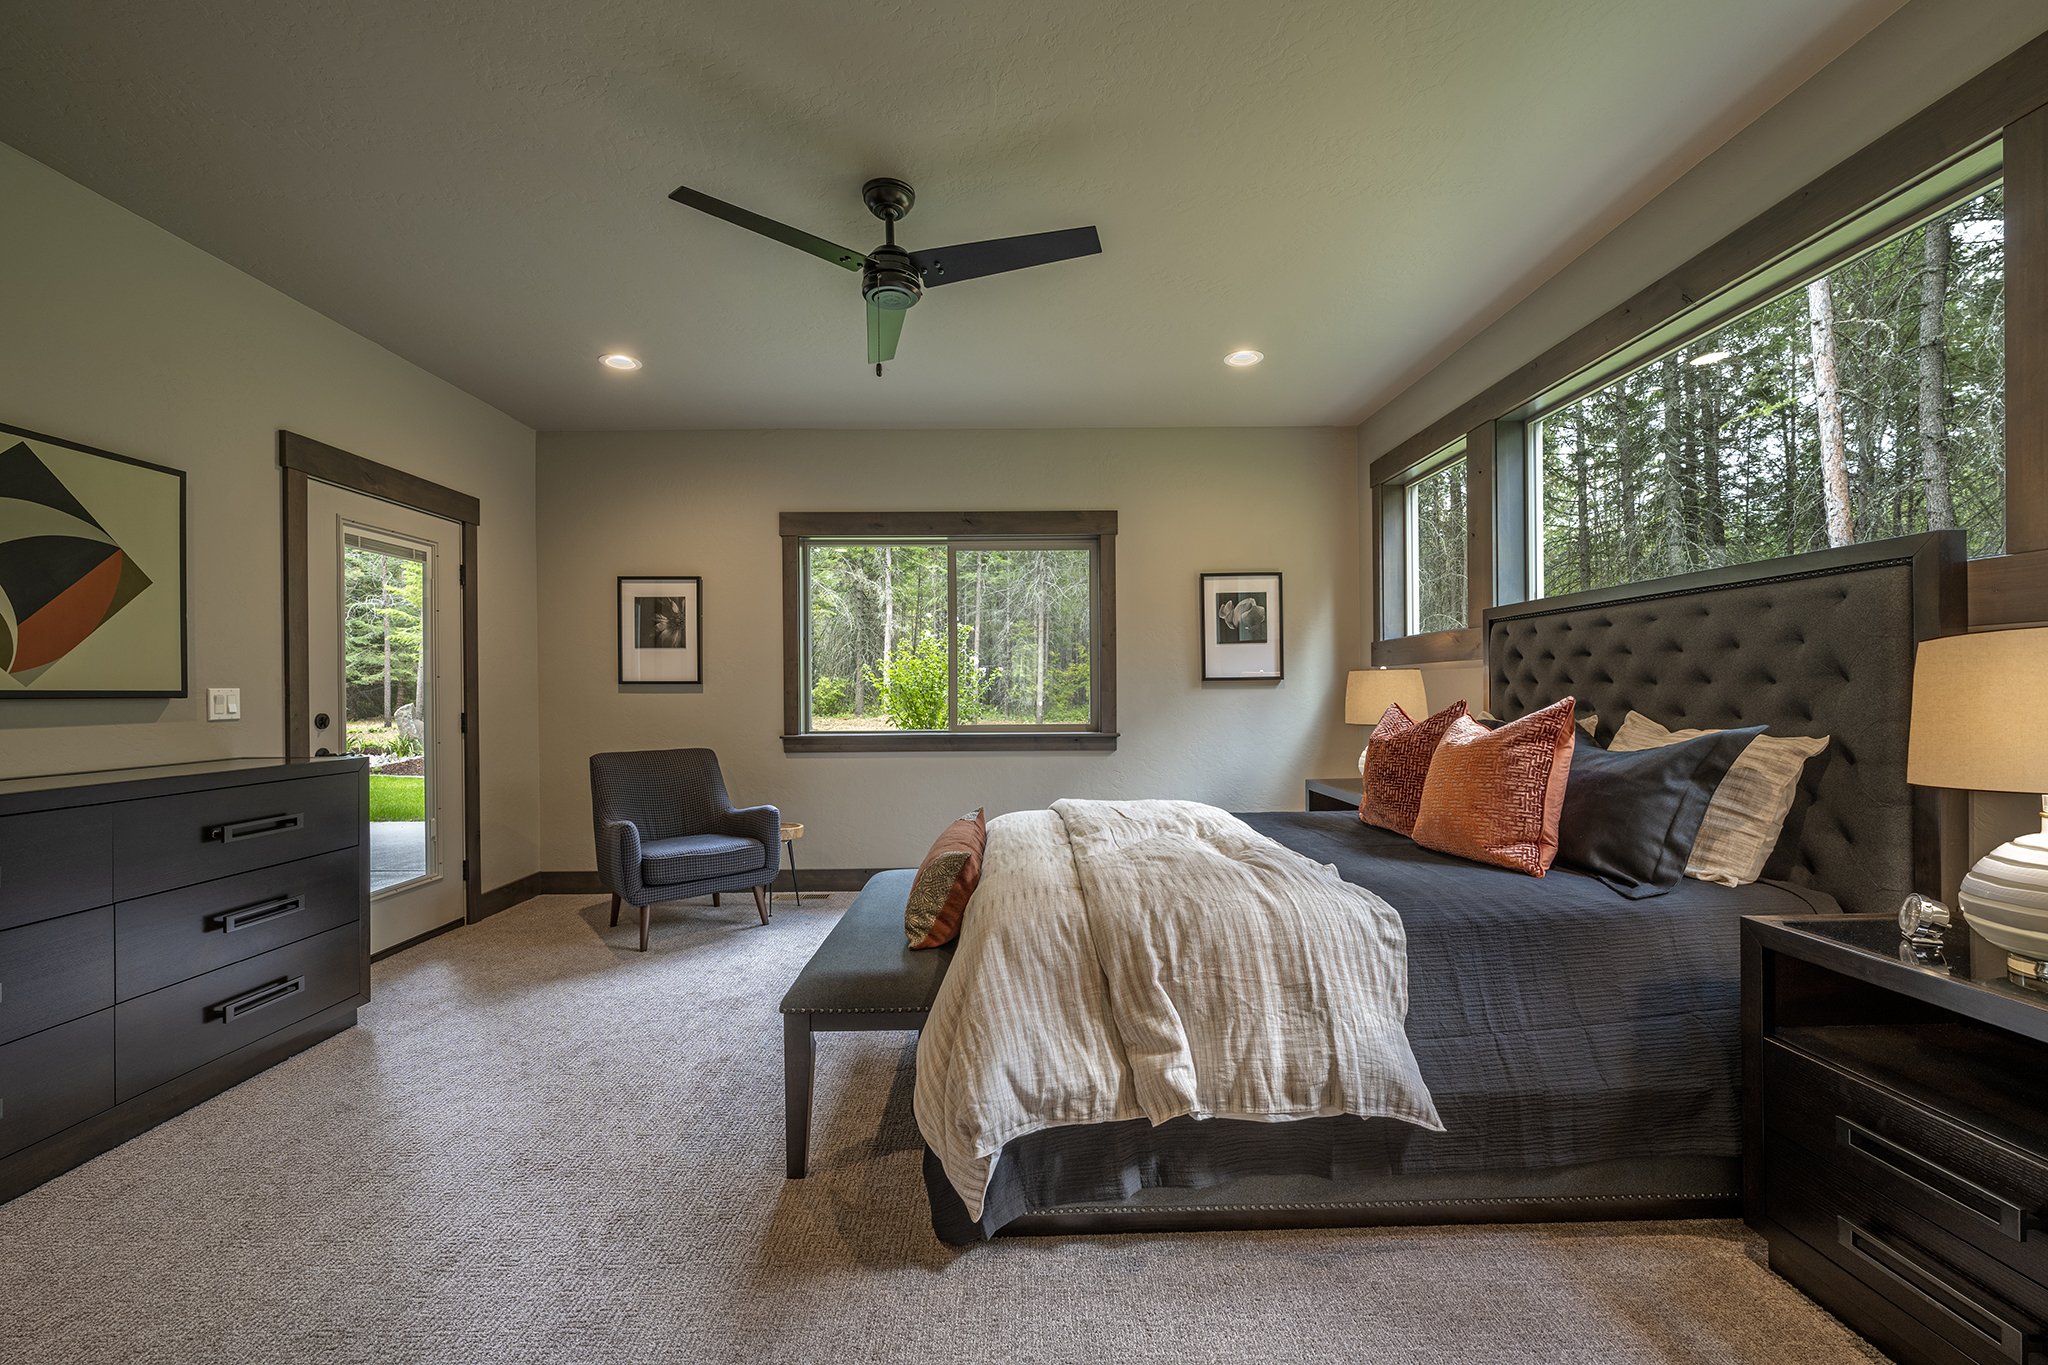 Emphasis on the scenery continues in the master bedroom, with two windows plus a glass-paneled door that accesses the patio and hot tub.